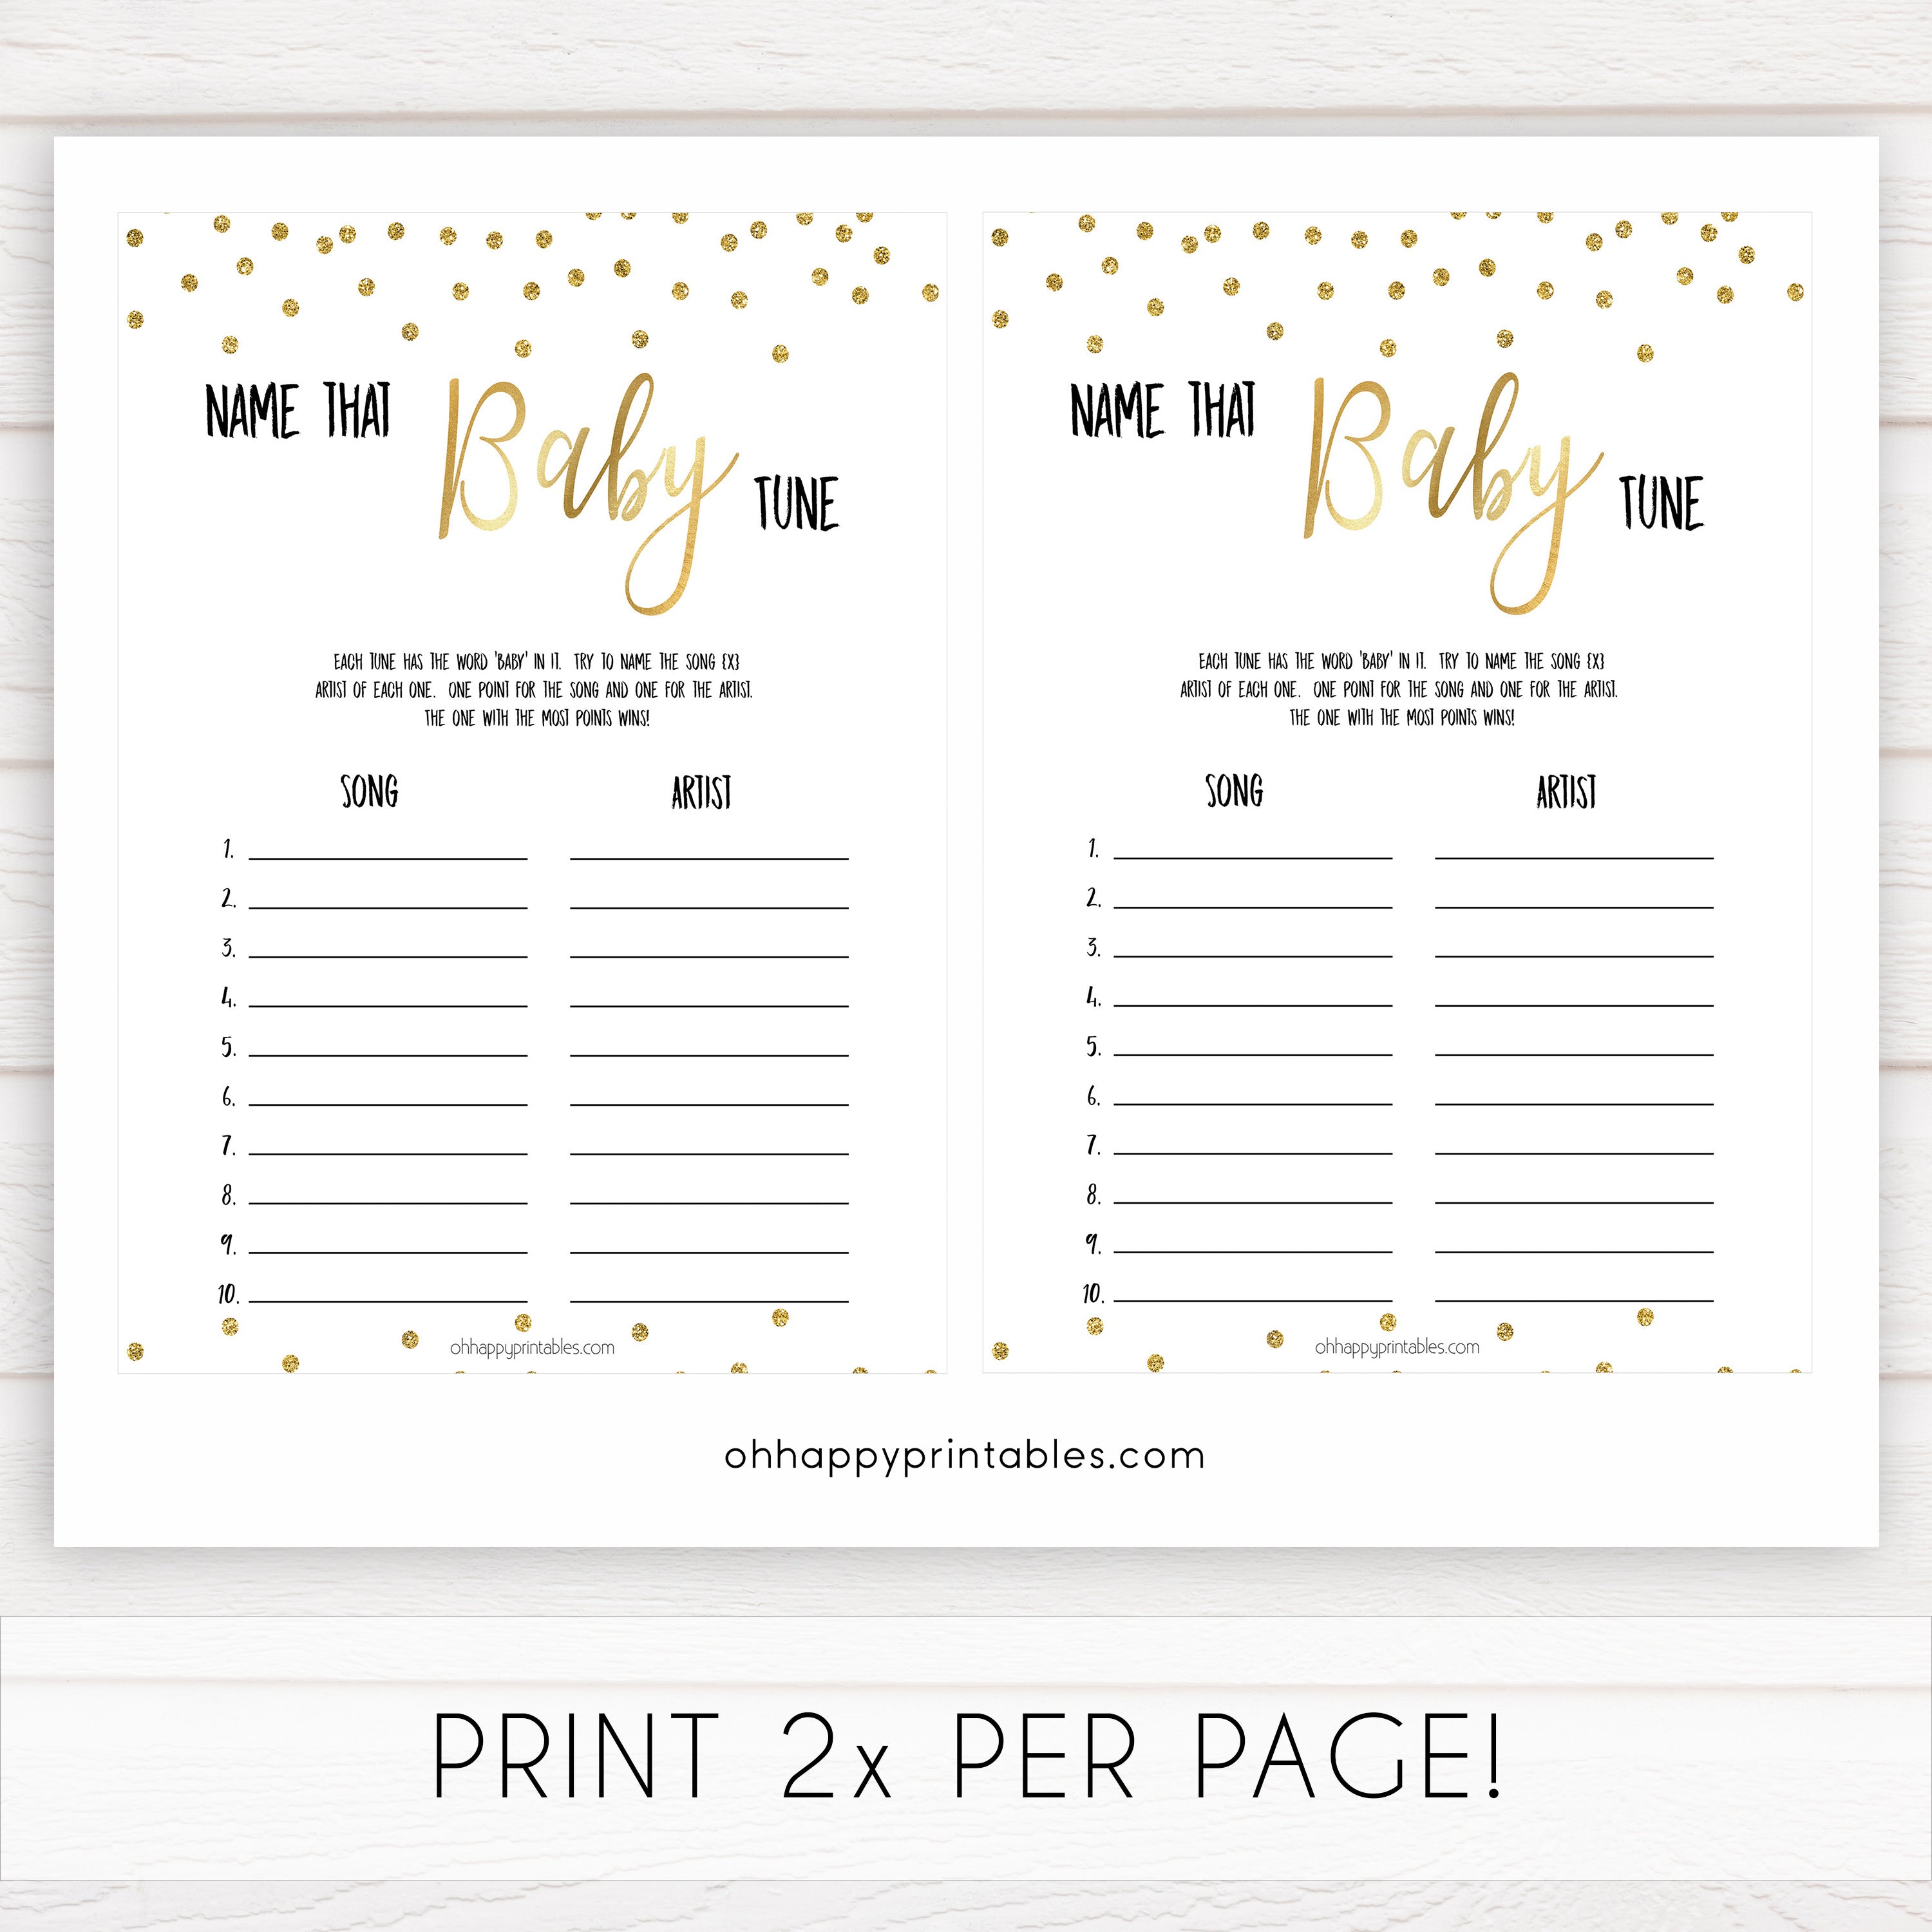 gold baby shower games, name that baby tune games, printable baby games, fun baby games, popular baby games, baby shower games, gold baby games, print baby games, gold baby shower